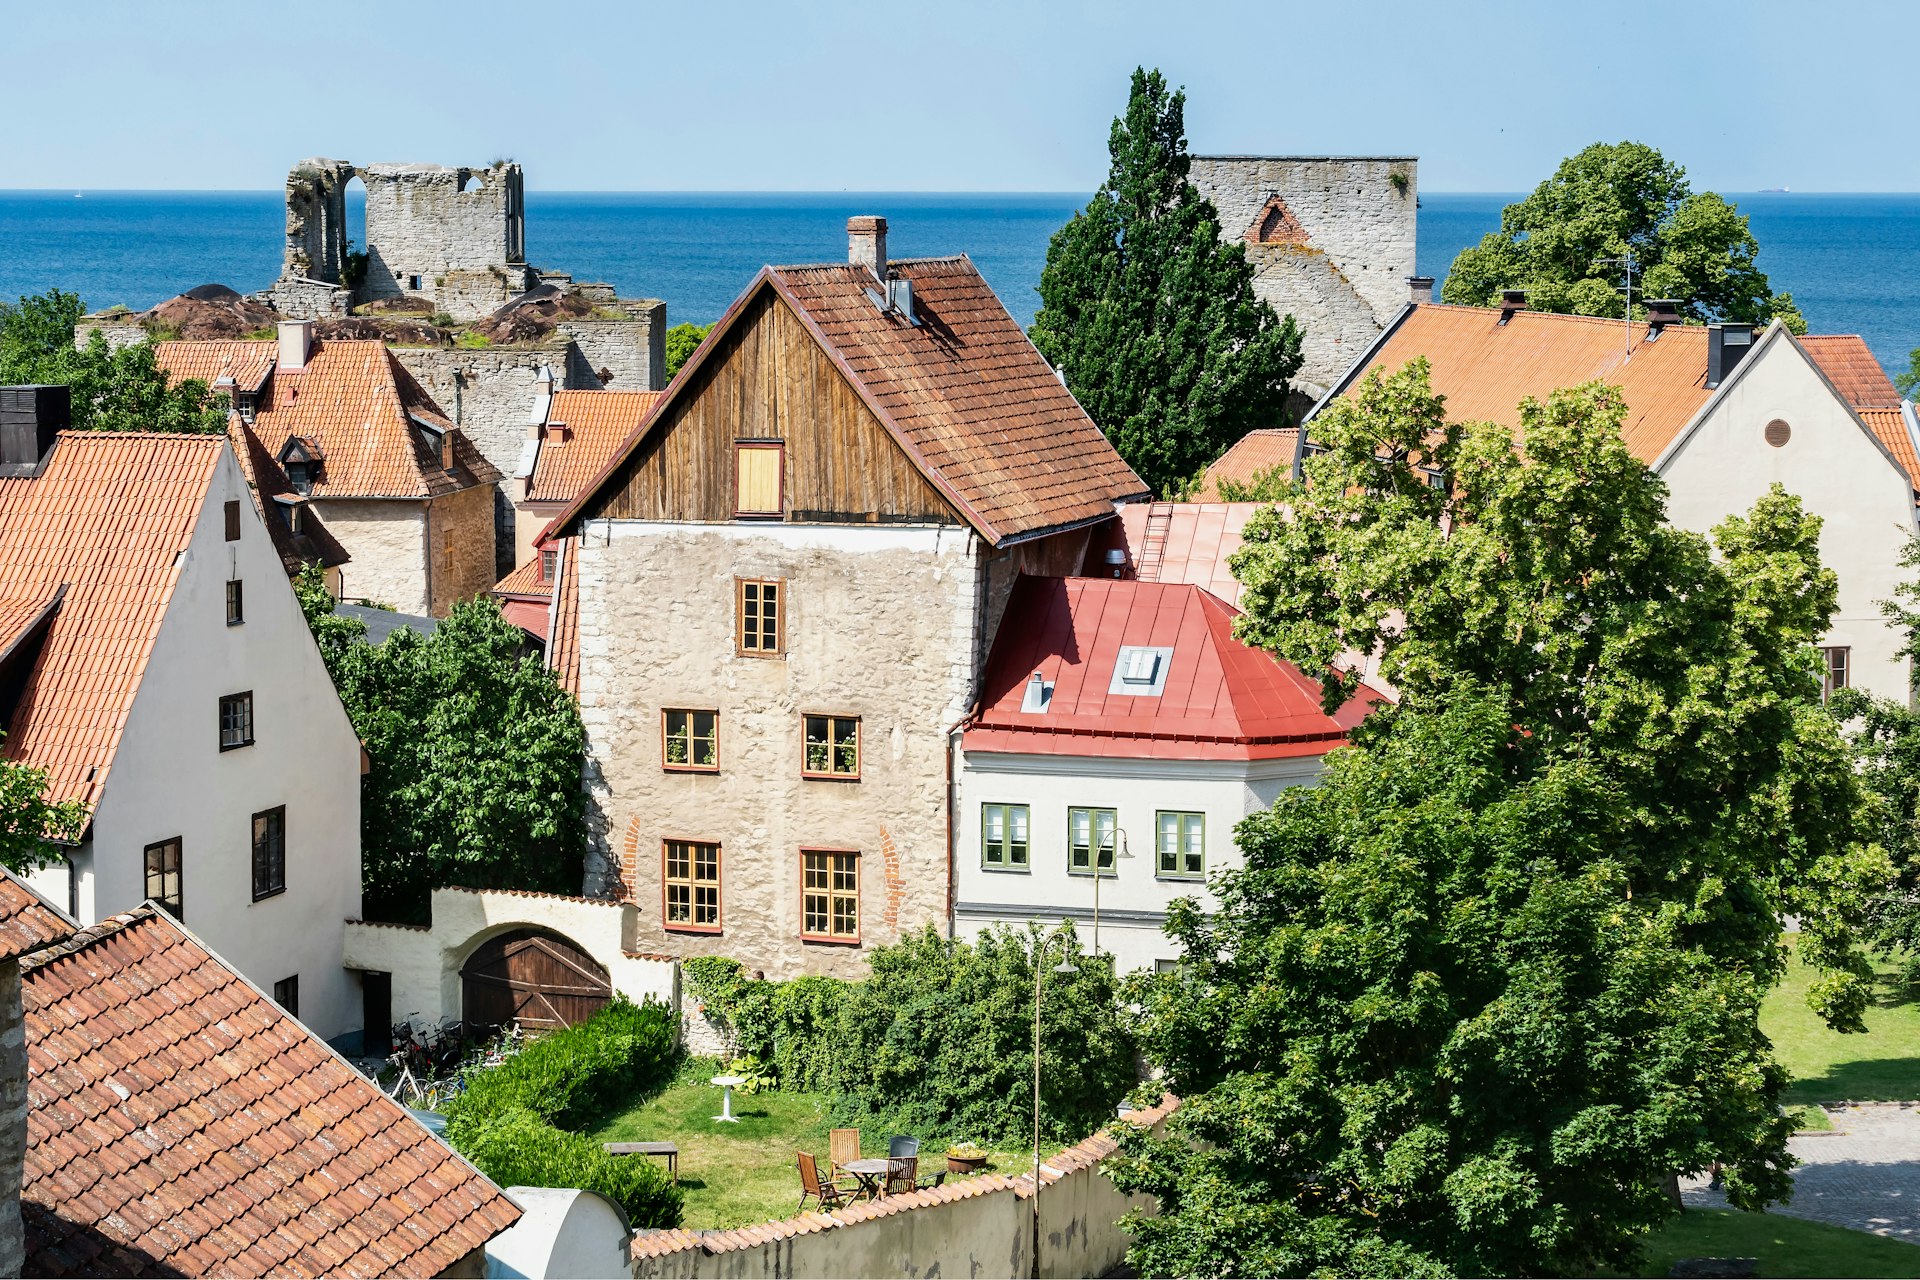 View over the old town of the city of Visby with ancient buildings and the sea in the background. 